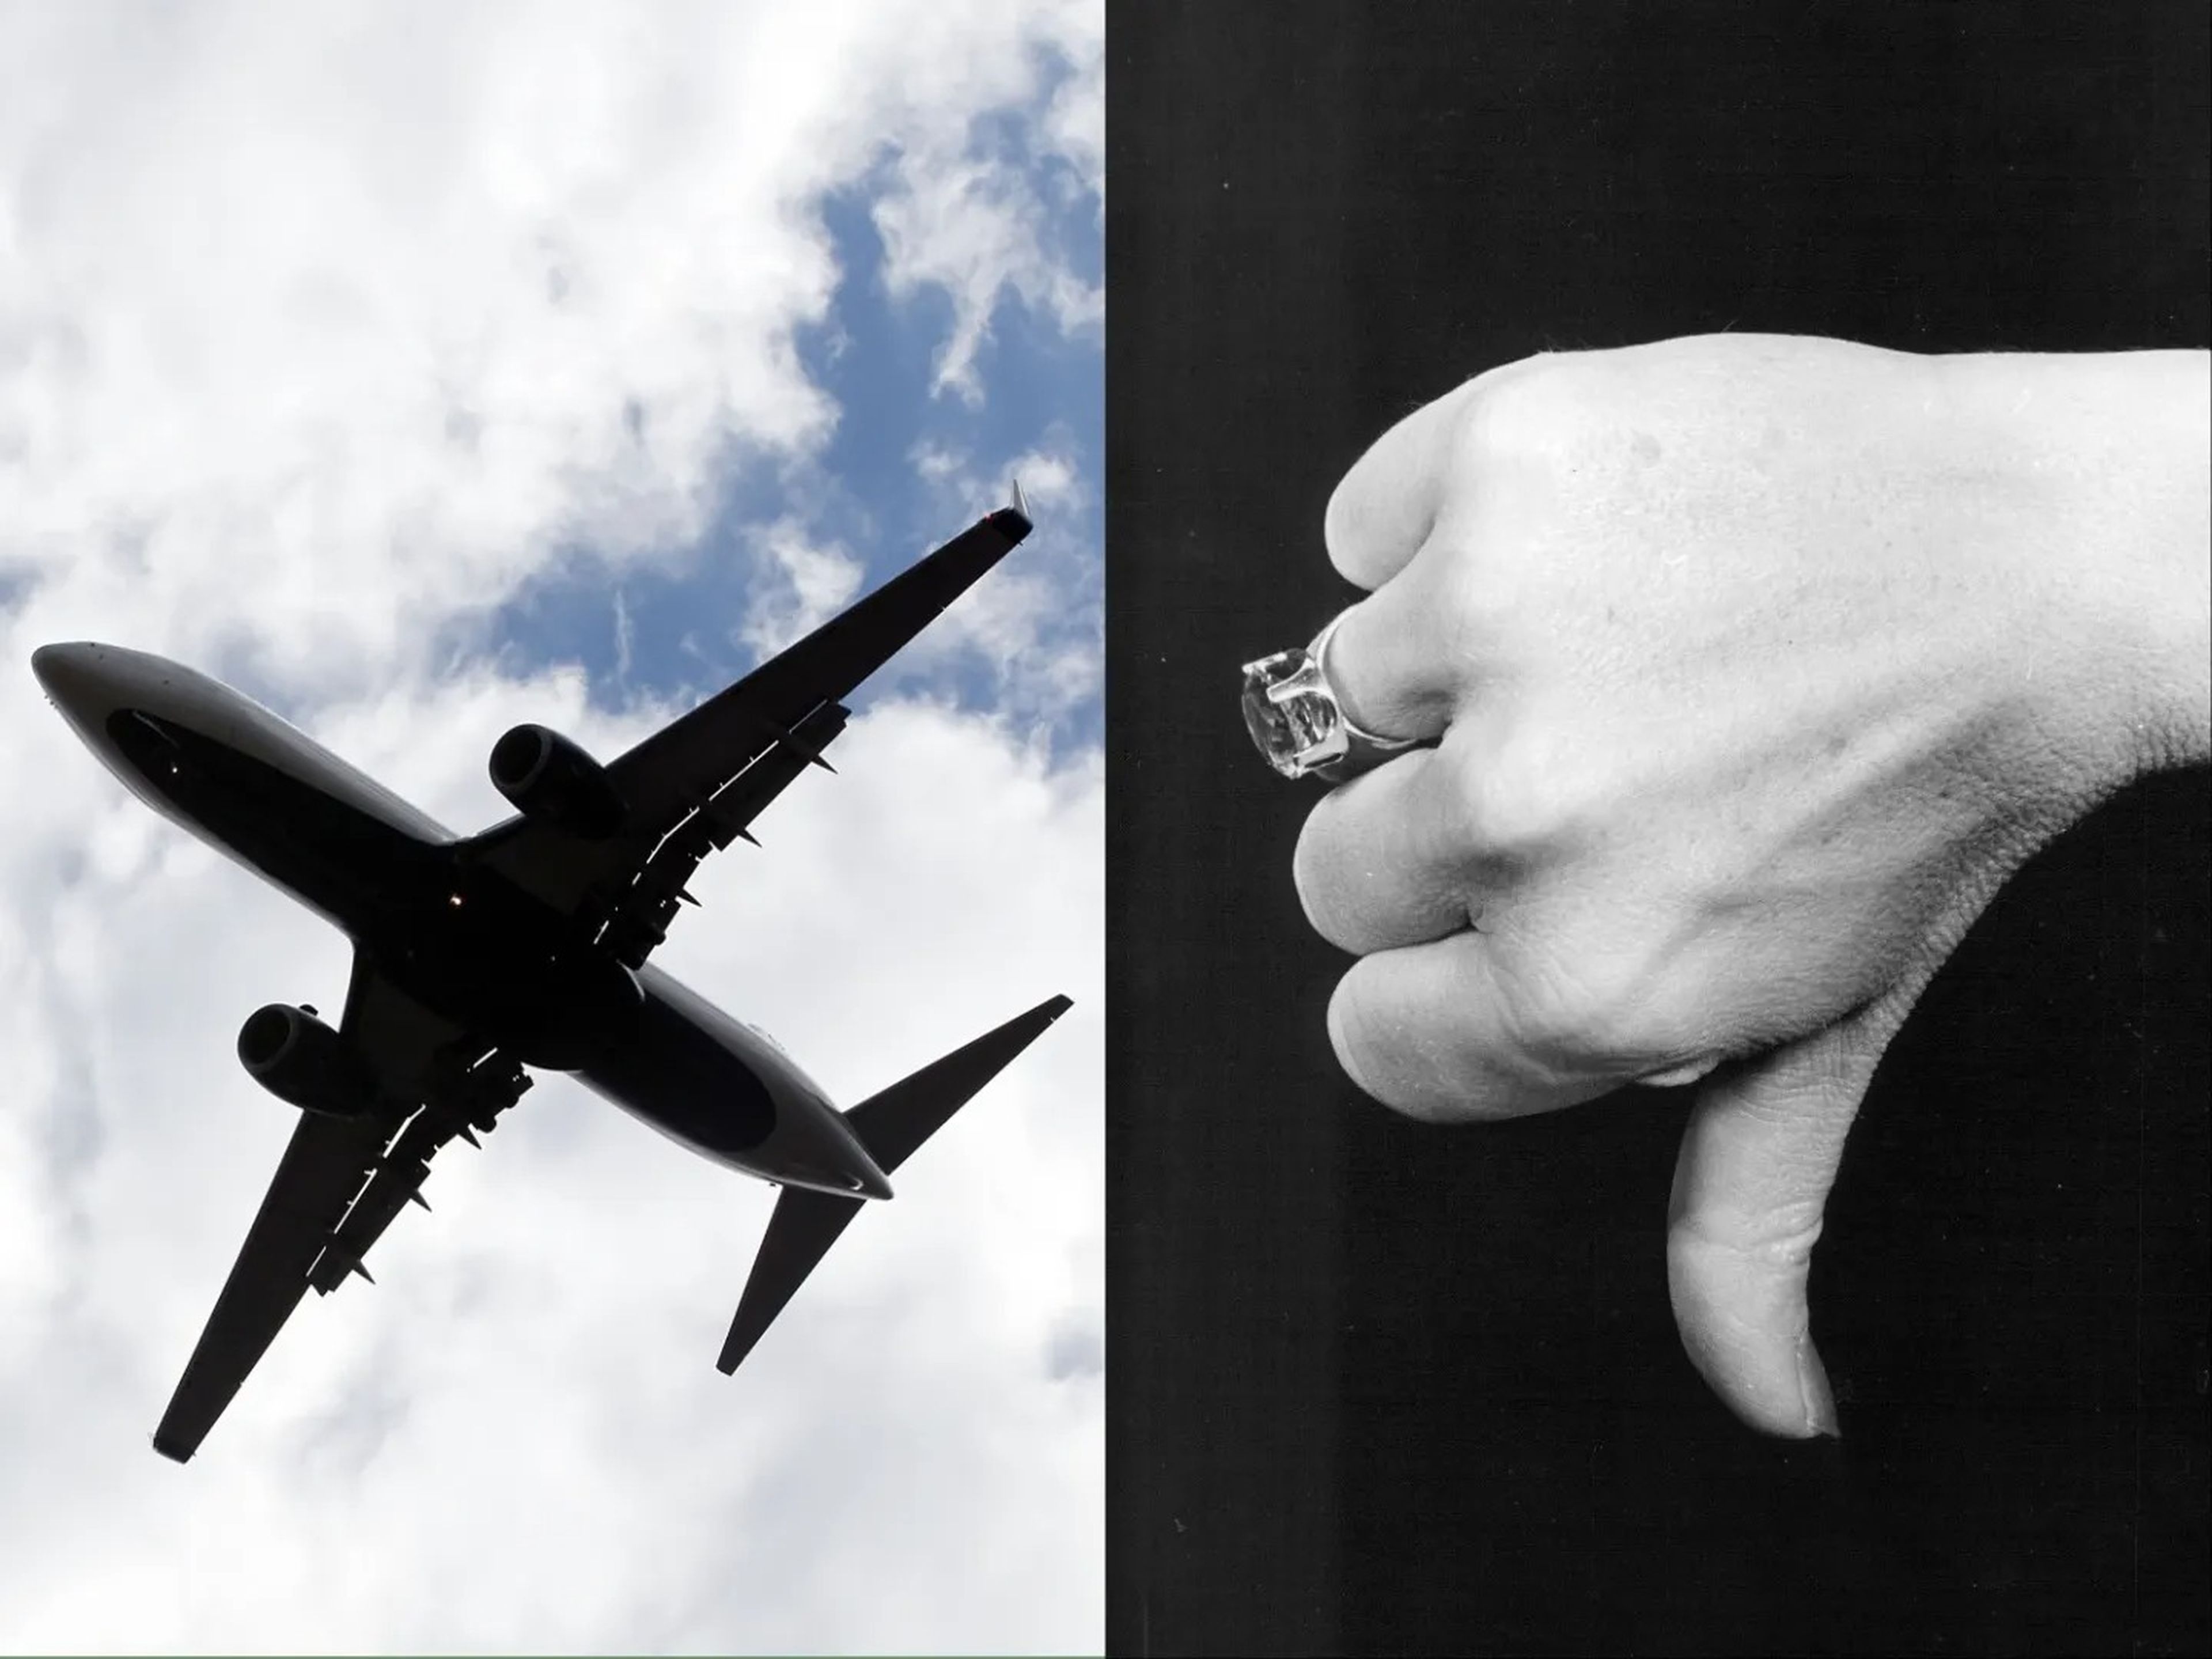 The view of a plane as it passes overhead on a sunny day (left) next to a thumbs down gesture from a hand wearing a fancy ring (right)